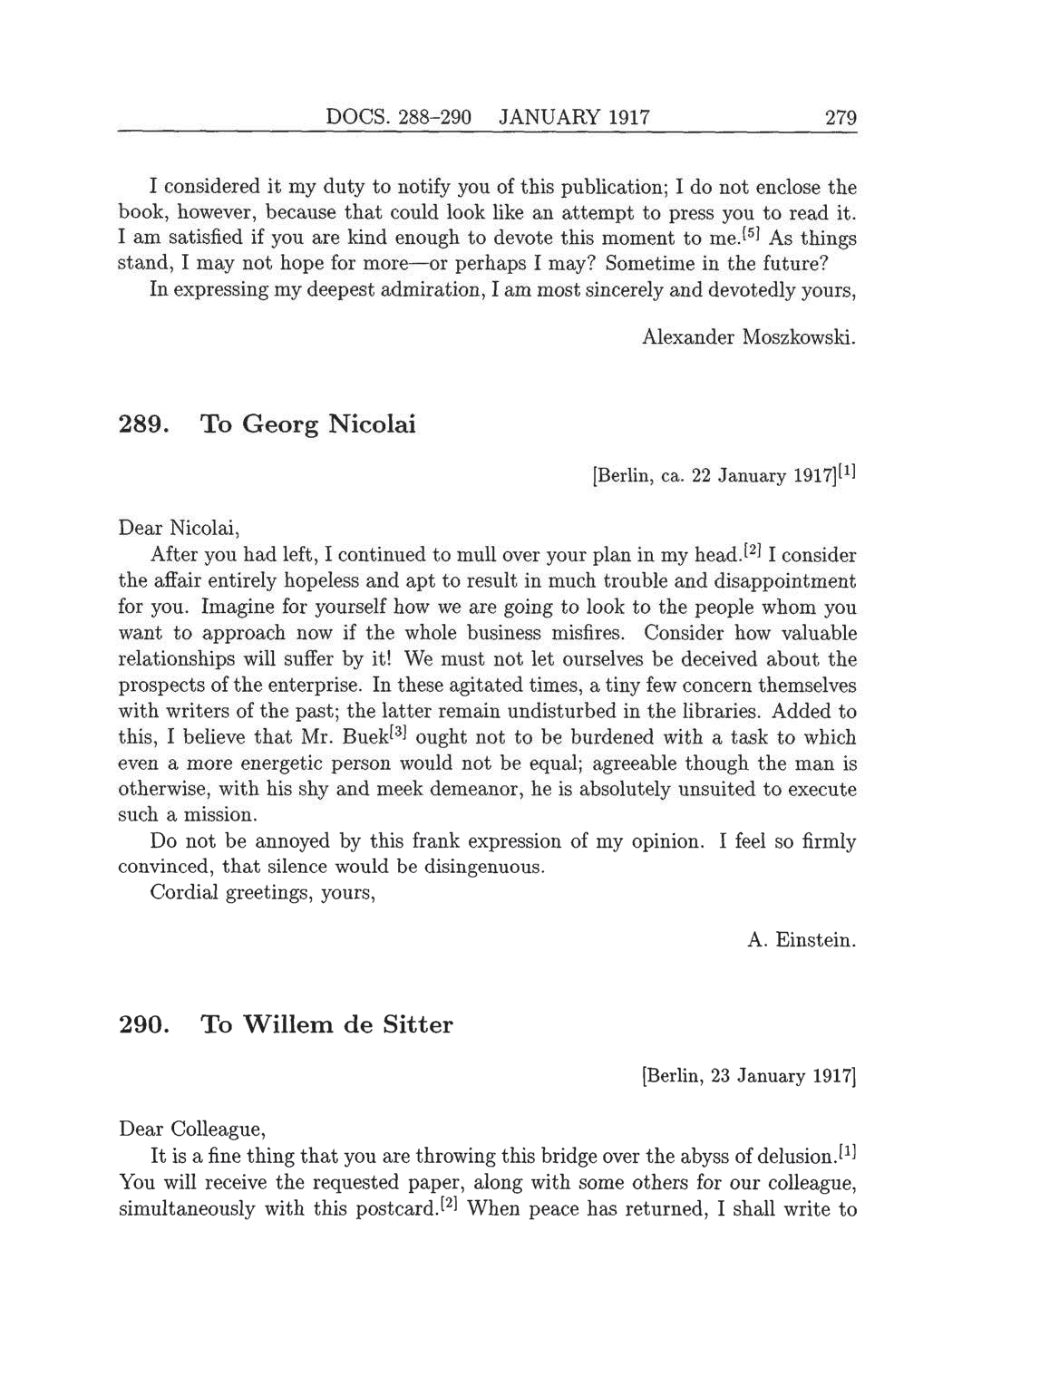 Volume 8: The Berlin Years: Correspondence, 1914-1918 (English translation supplement) page 279